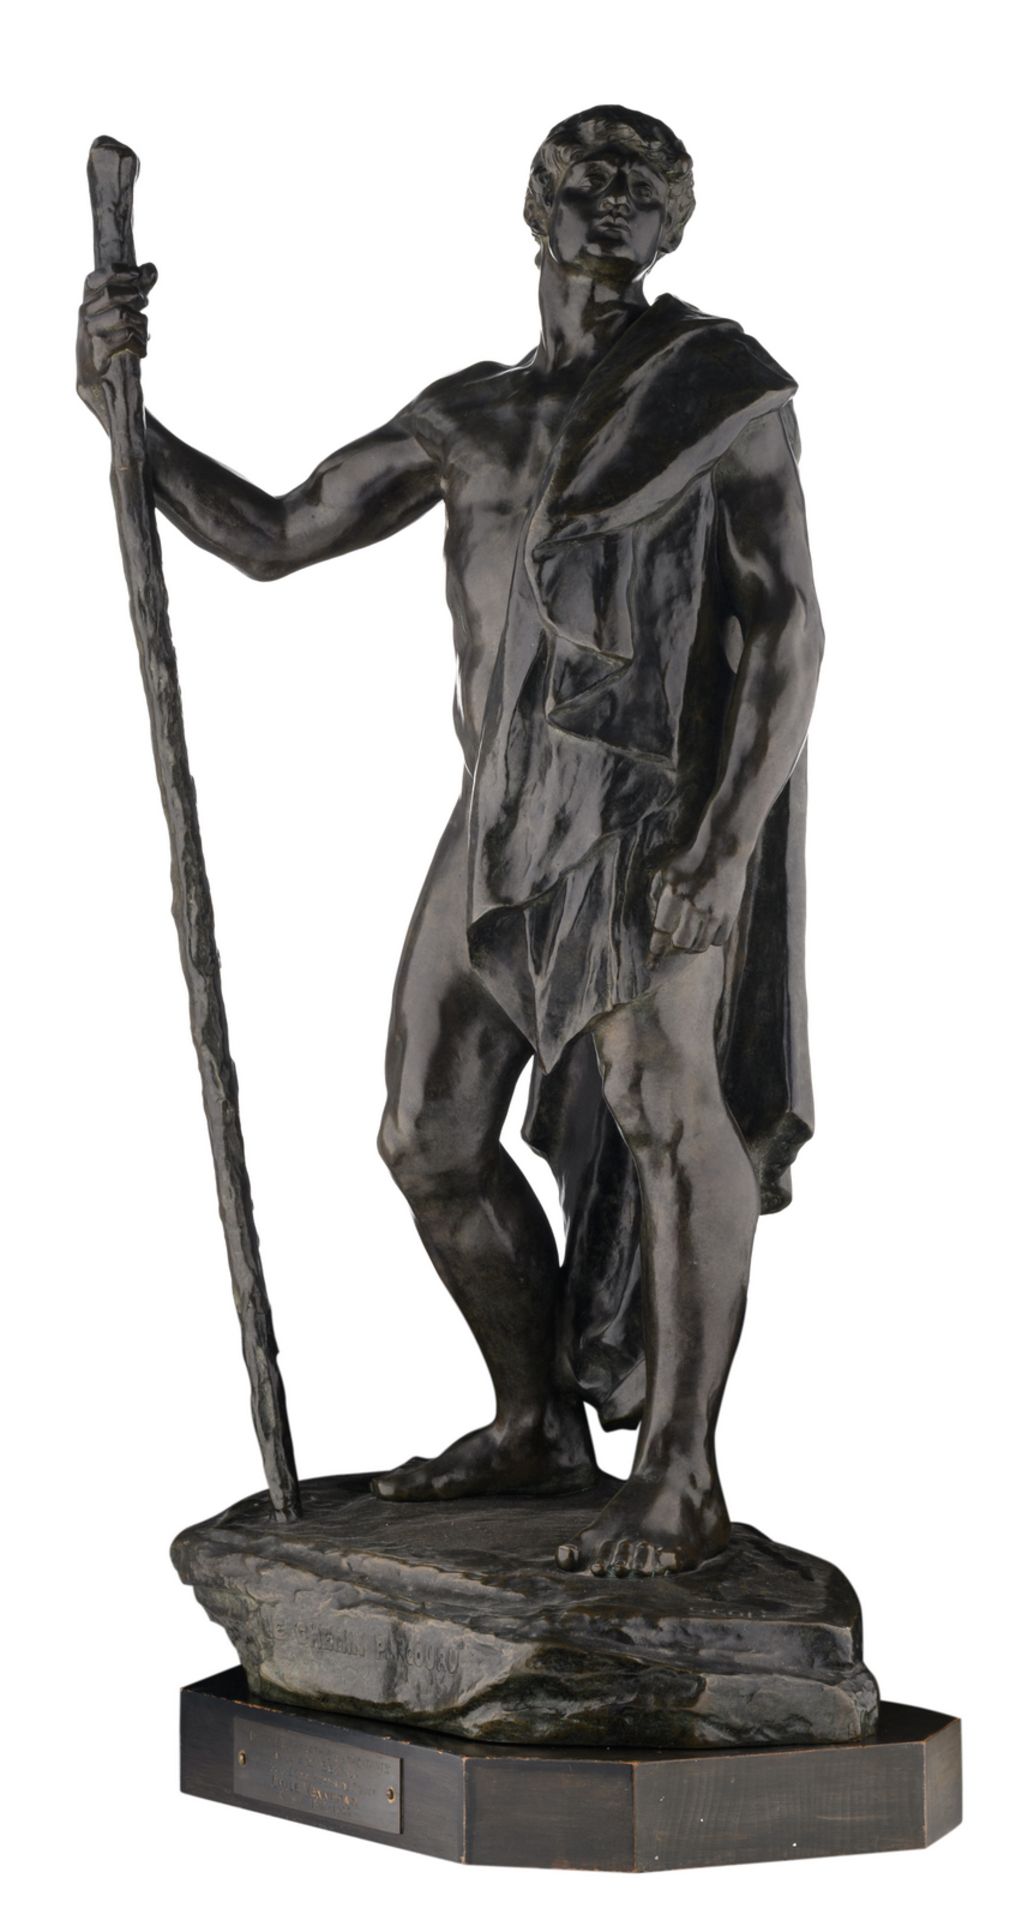 Colin G., 'Le chemin parcouru', patinated bronze, on a wooden base with dedication to Emile